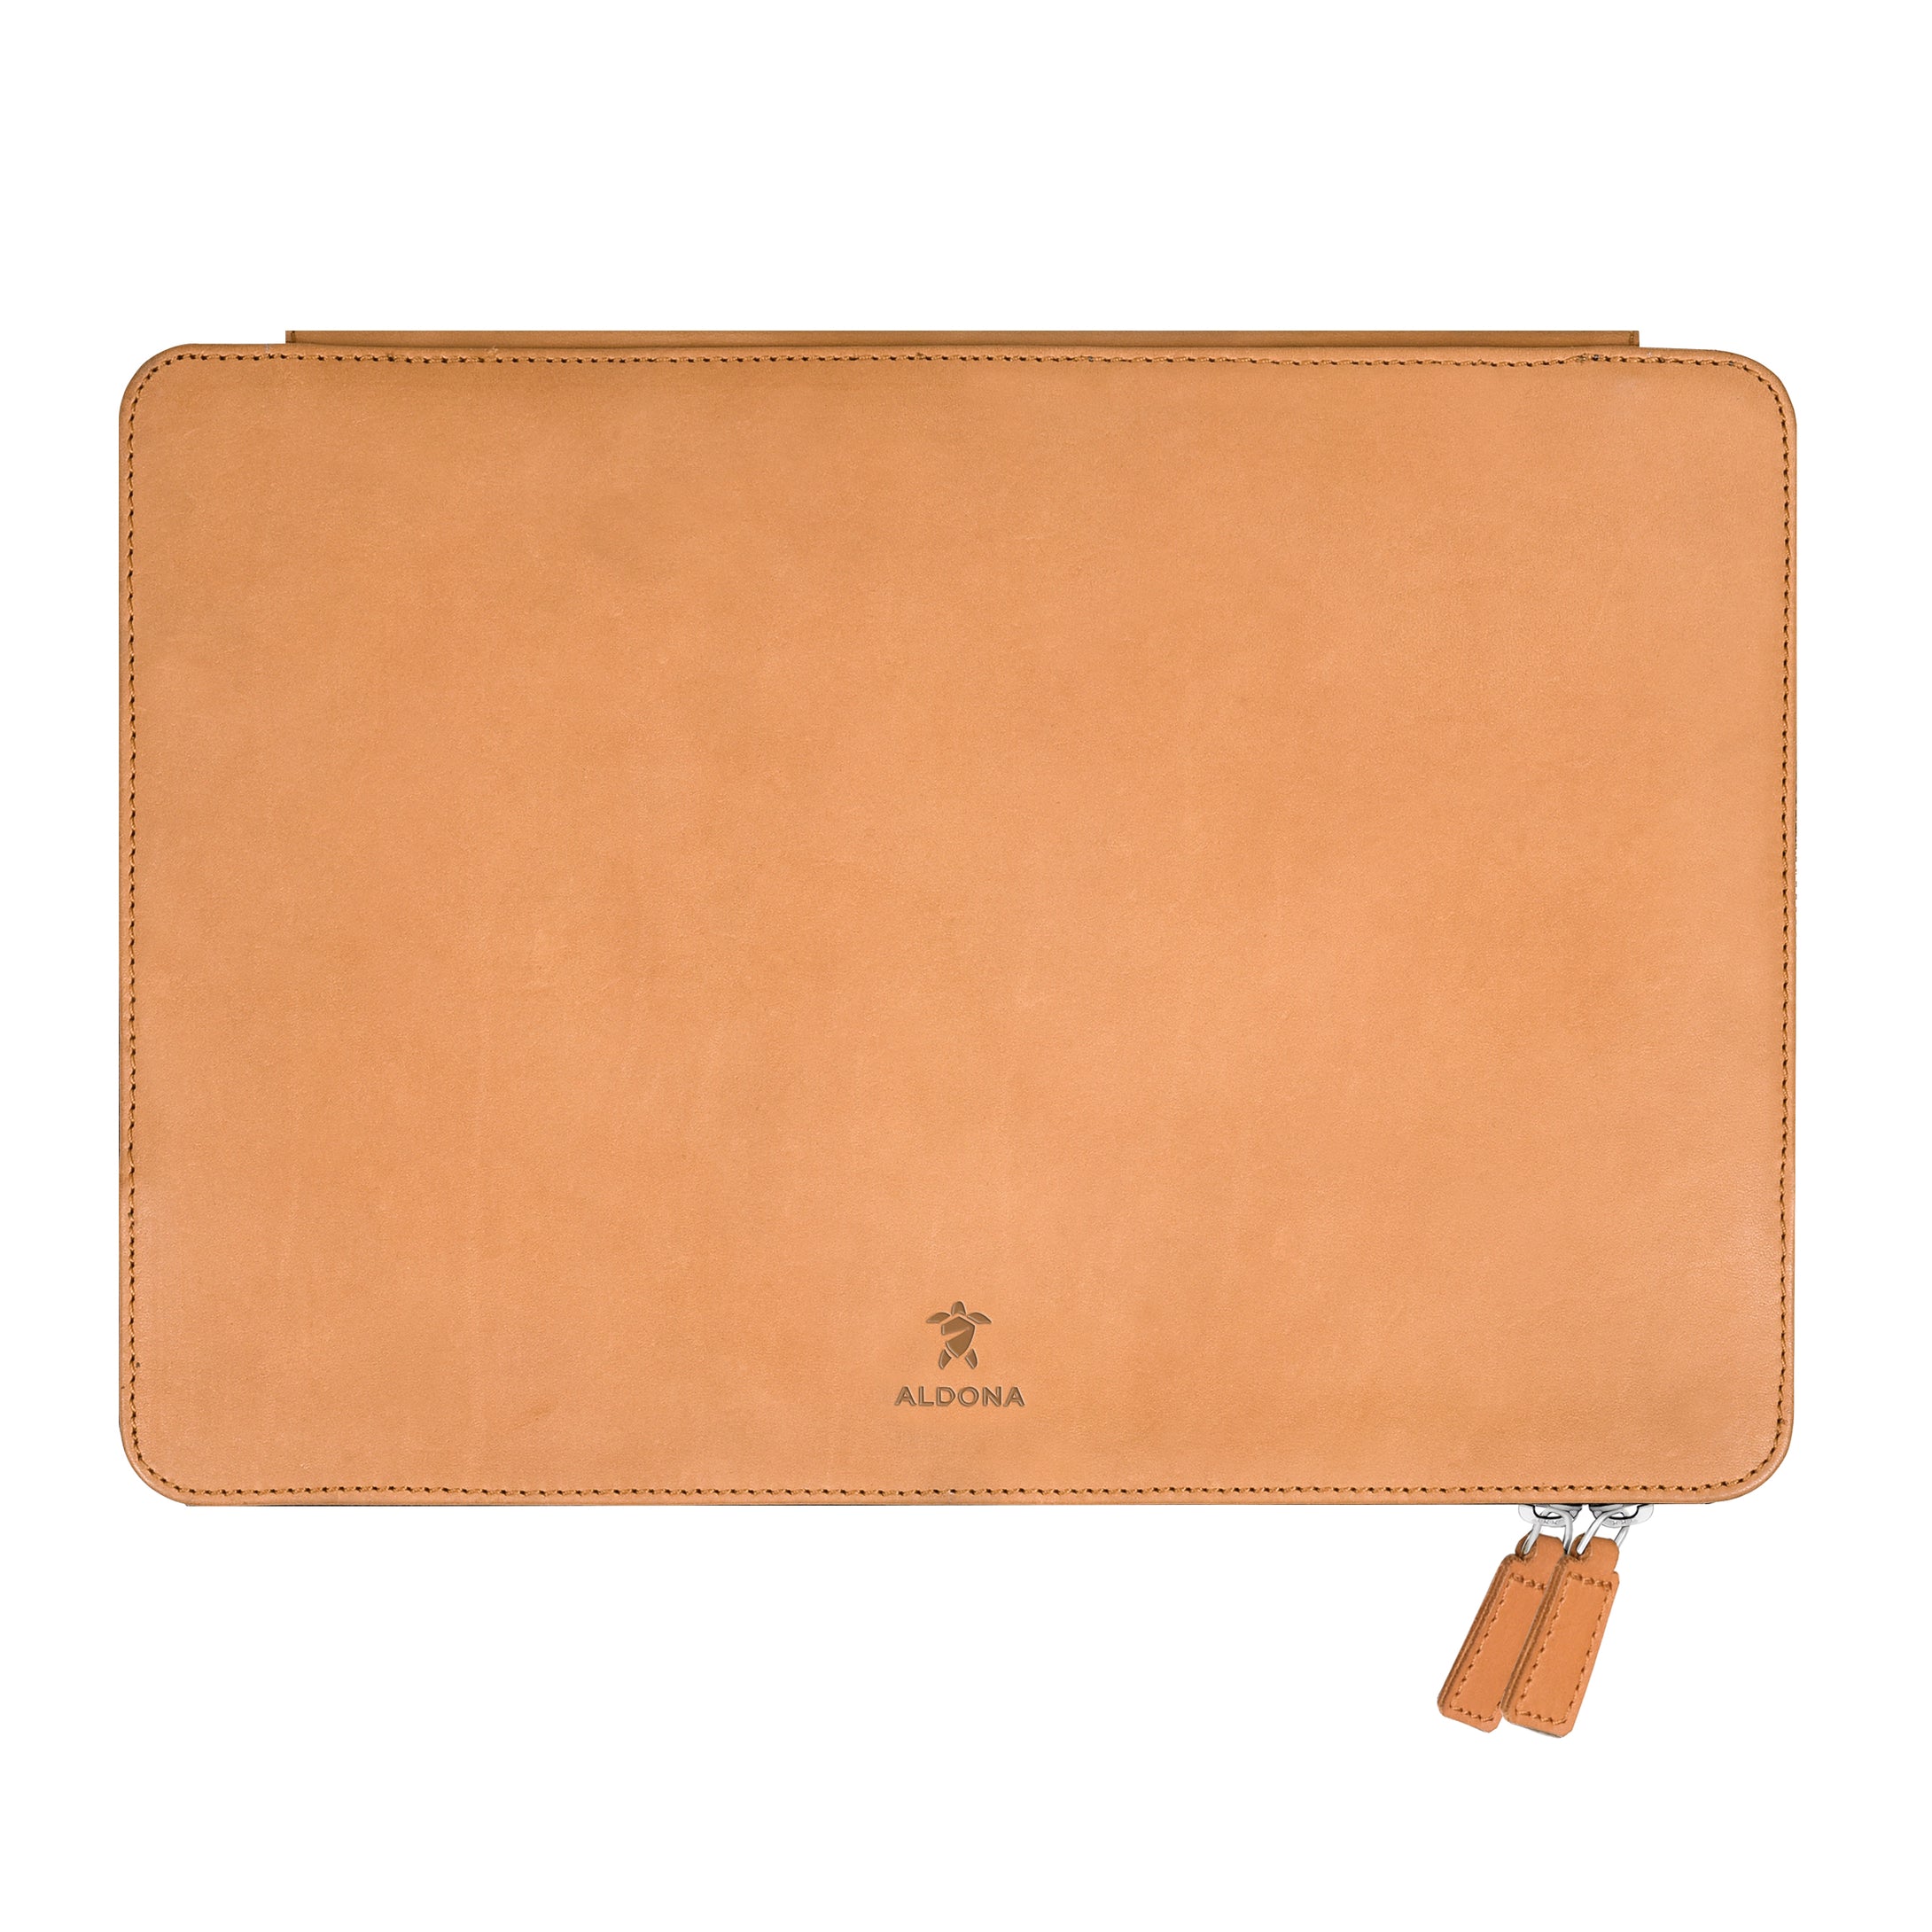 Megaleio Leather Sleeve for 12 Inch MacBook - Vintage Tan Colour